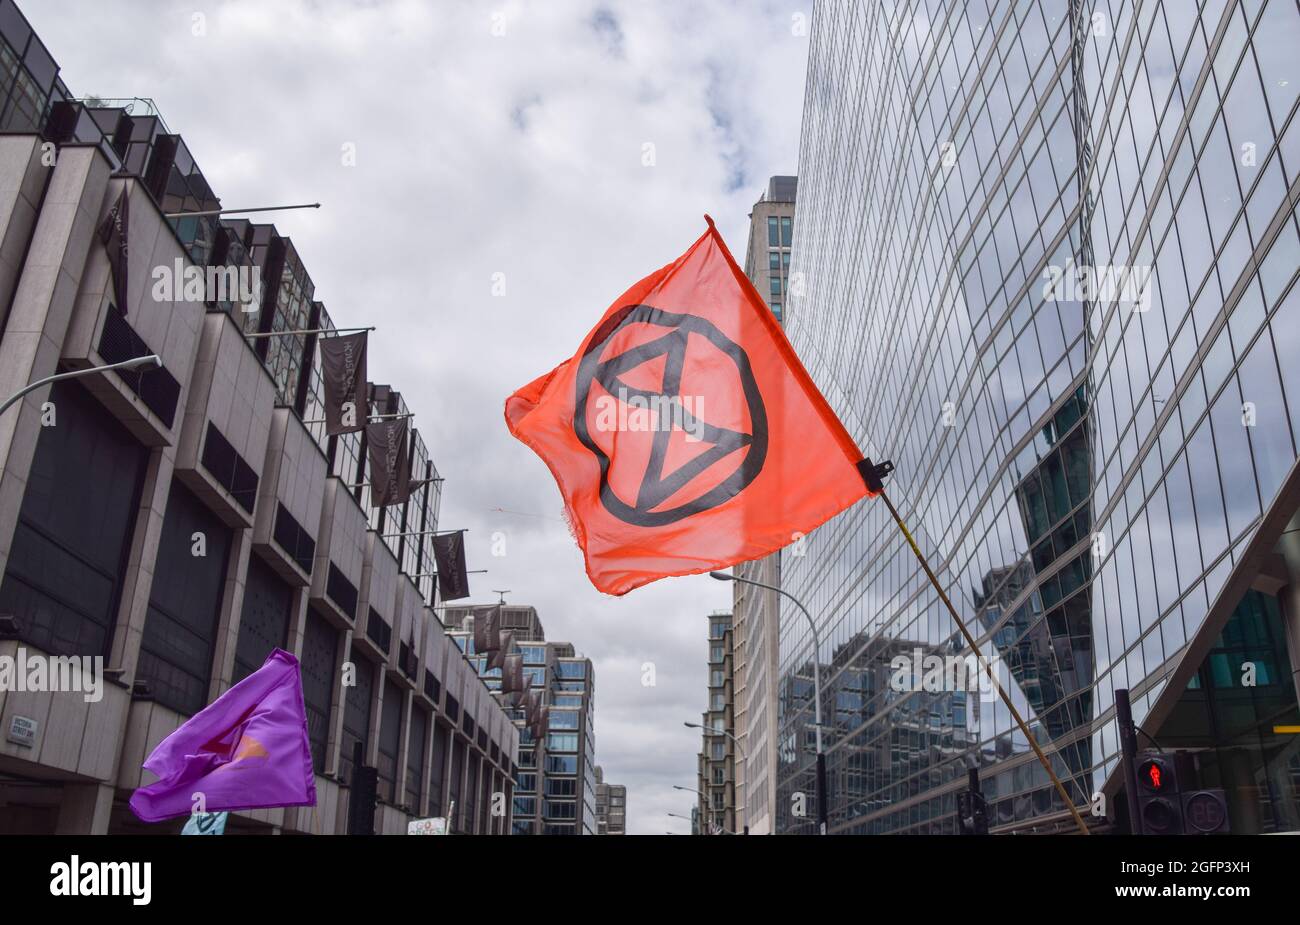 London, United Kingdom. 26th August 2021. Protesters in Victoria St. Extinction Rebellion protesters marched from Hyde Park to the Department for Business, Energy and Industrial Strategy as part of their two-week campaign, Impossible Rebellion, calling on the UK Government to act meaningfully on the climate and ecological crisis. (Credit: Vuk Valcic / Alamy Live News) Stock Photo